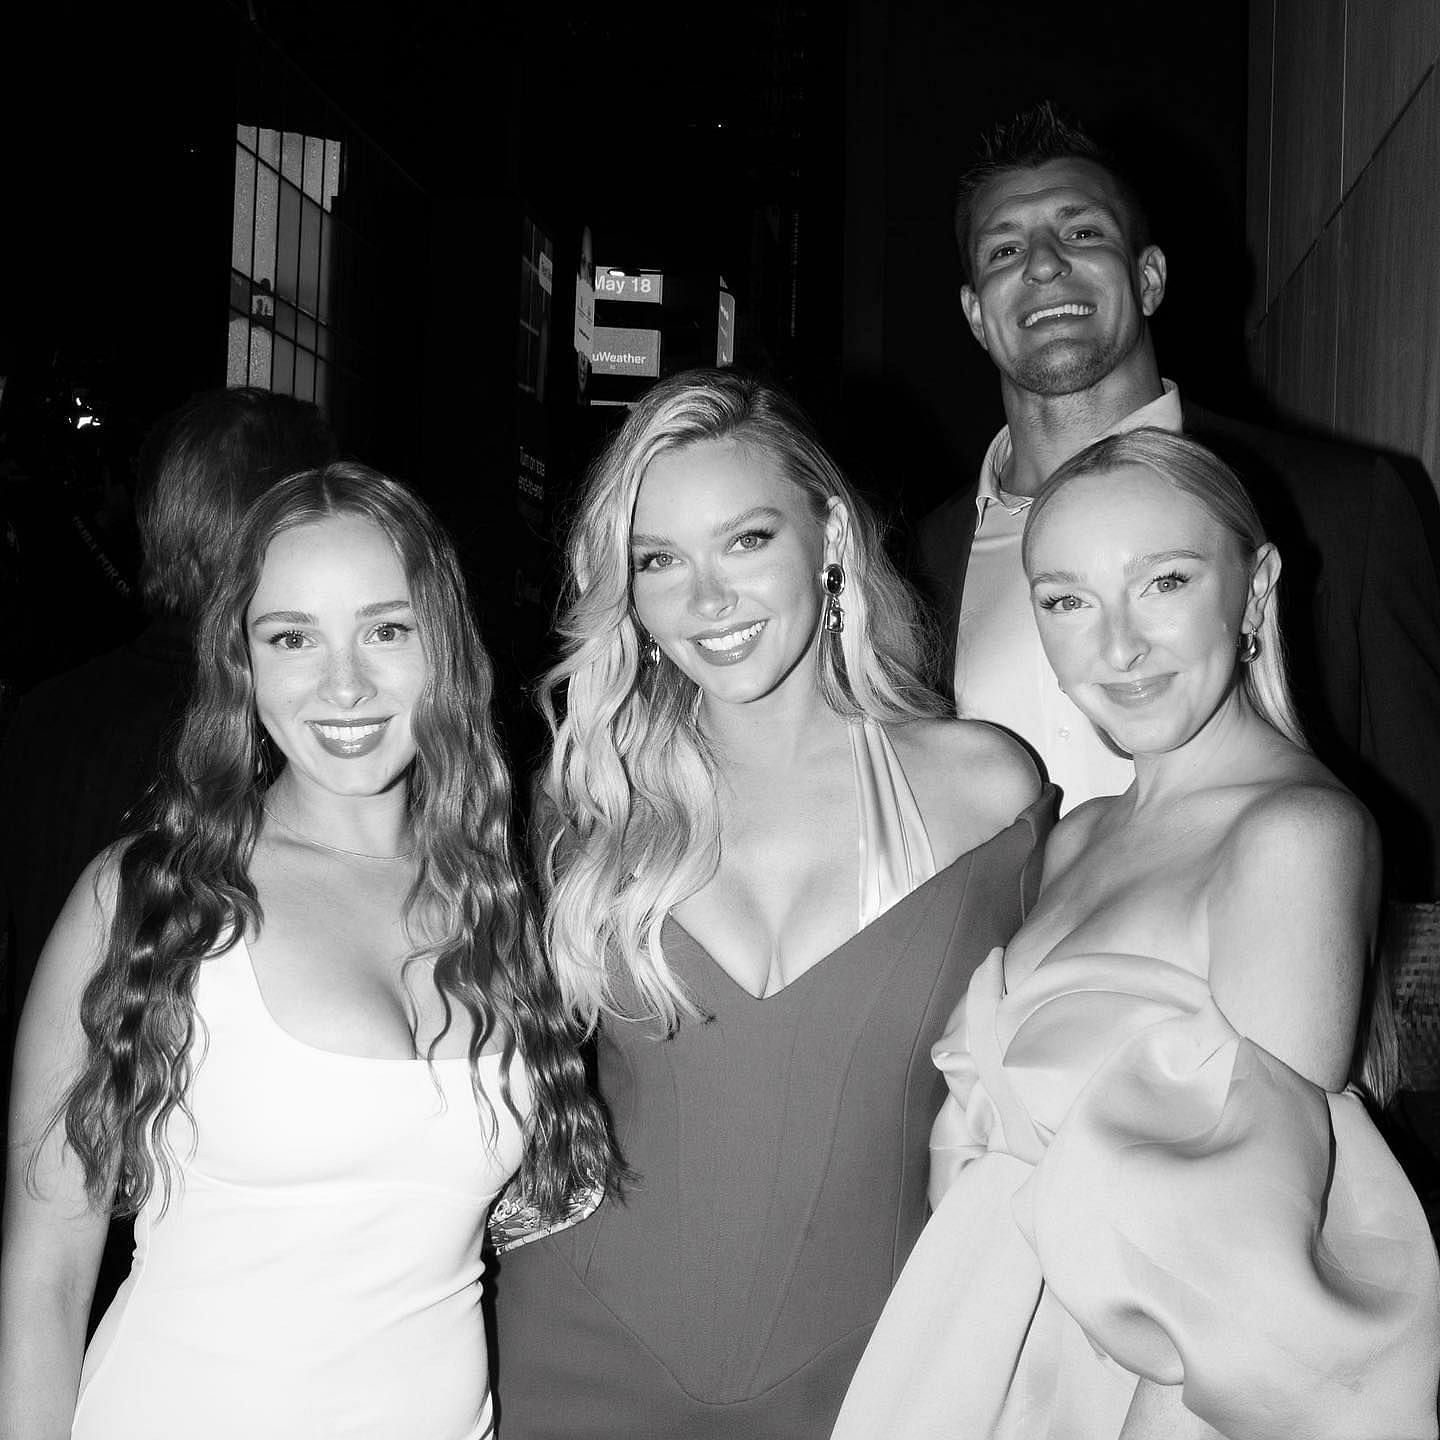 Rob Gronkowski and the Kostek sisters Camille, Alina, and Julia at the 2023 Sports Illustrated Swimsuit Issue launch party - image via IG/@camillekostek